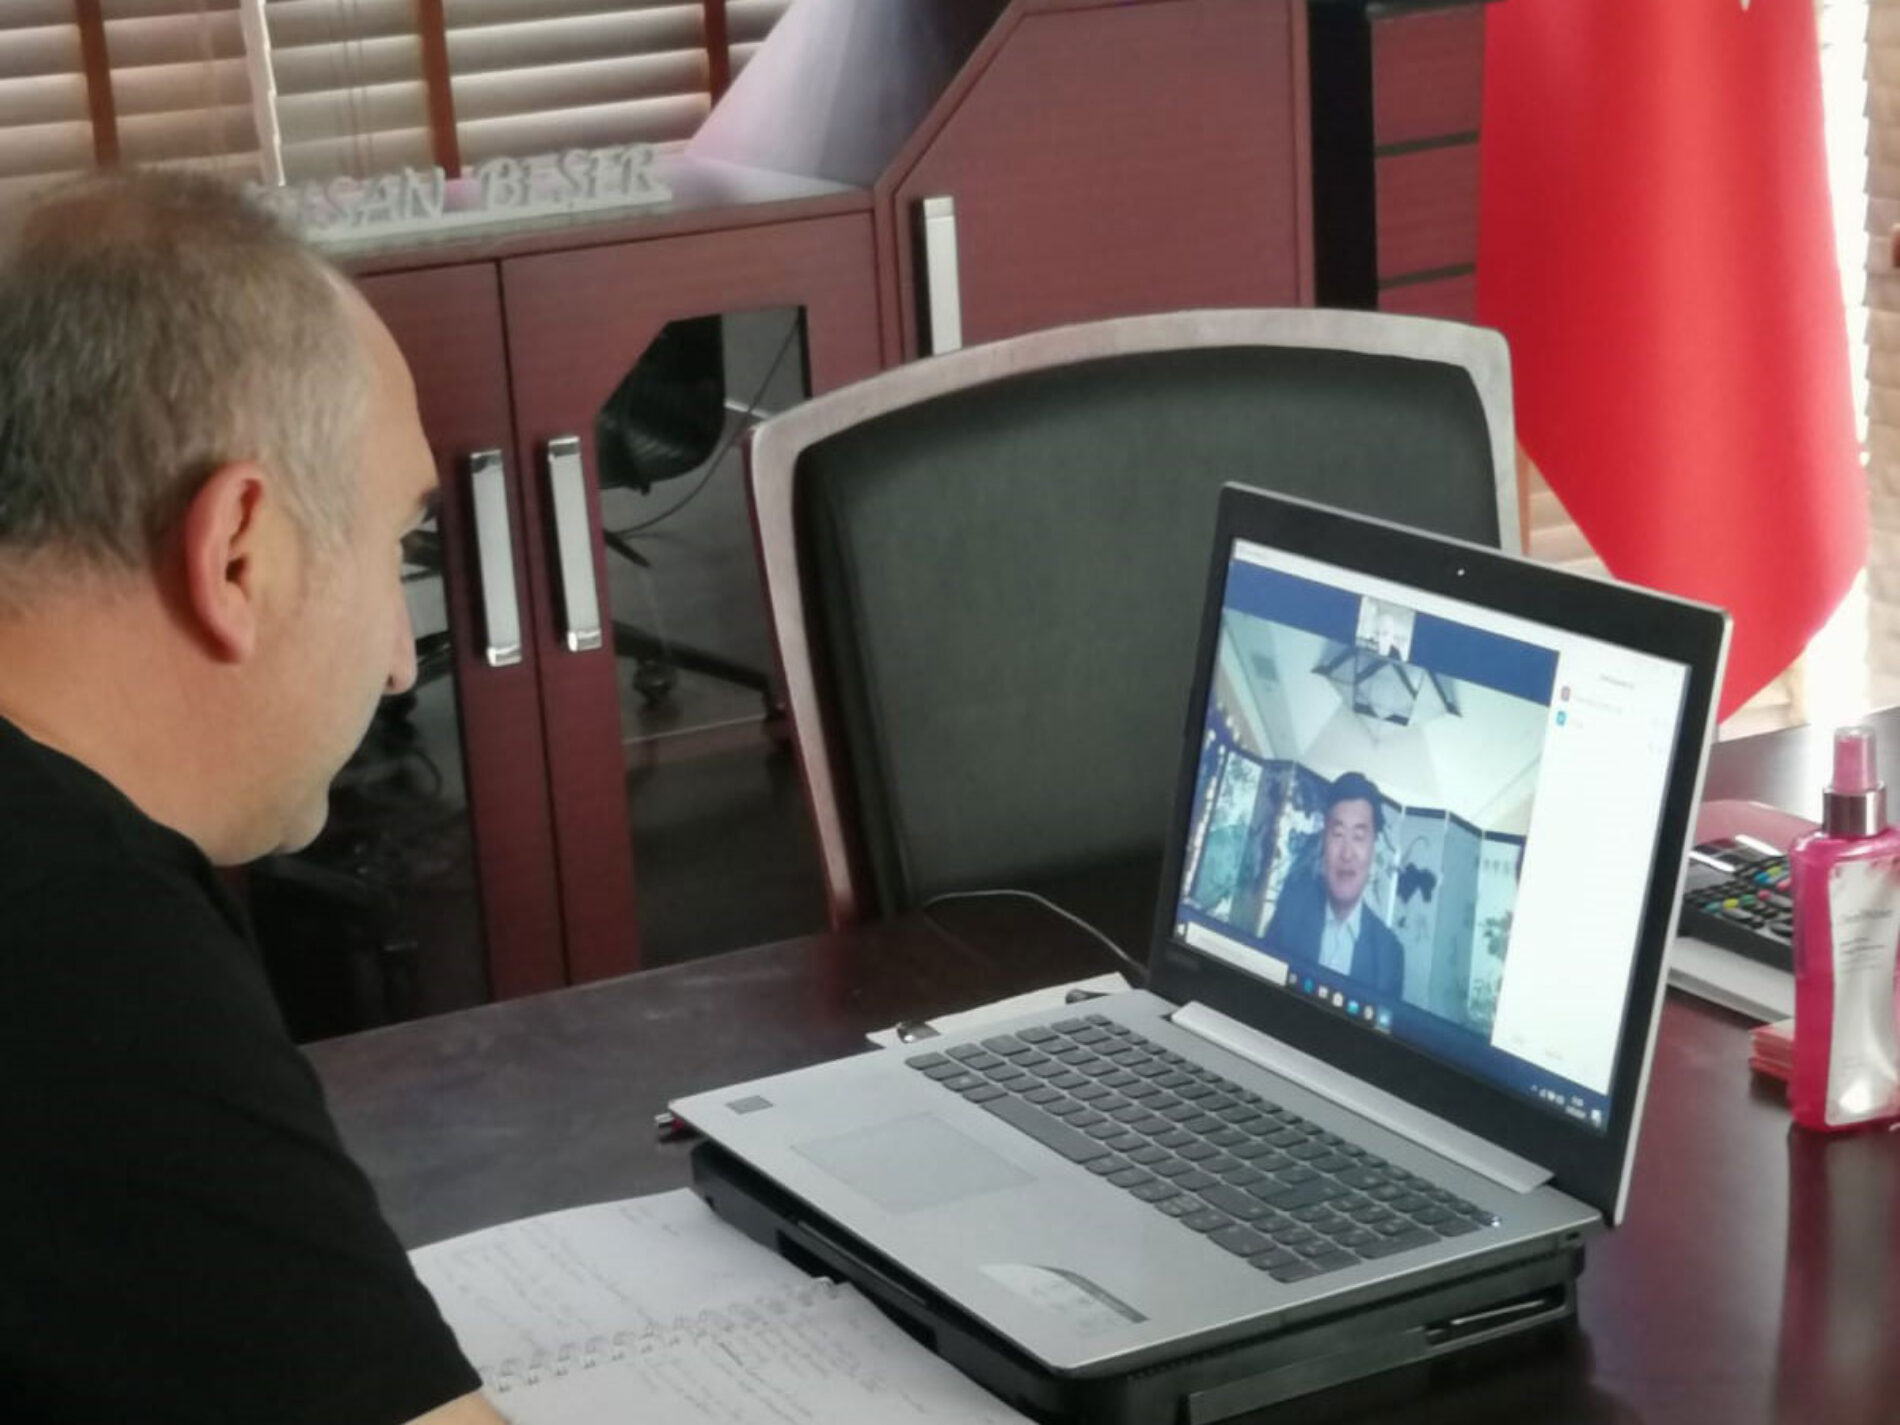 Our Board Chairman, Mr. İhsan BEŞER, held a meeting via Zoom with Mr. Lui YUHUA,  the Undersecretary of Economy and Trade